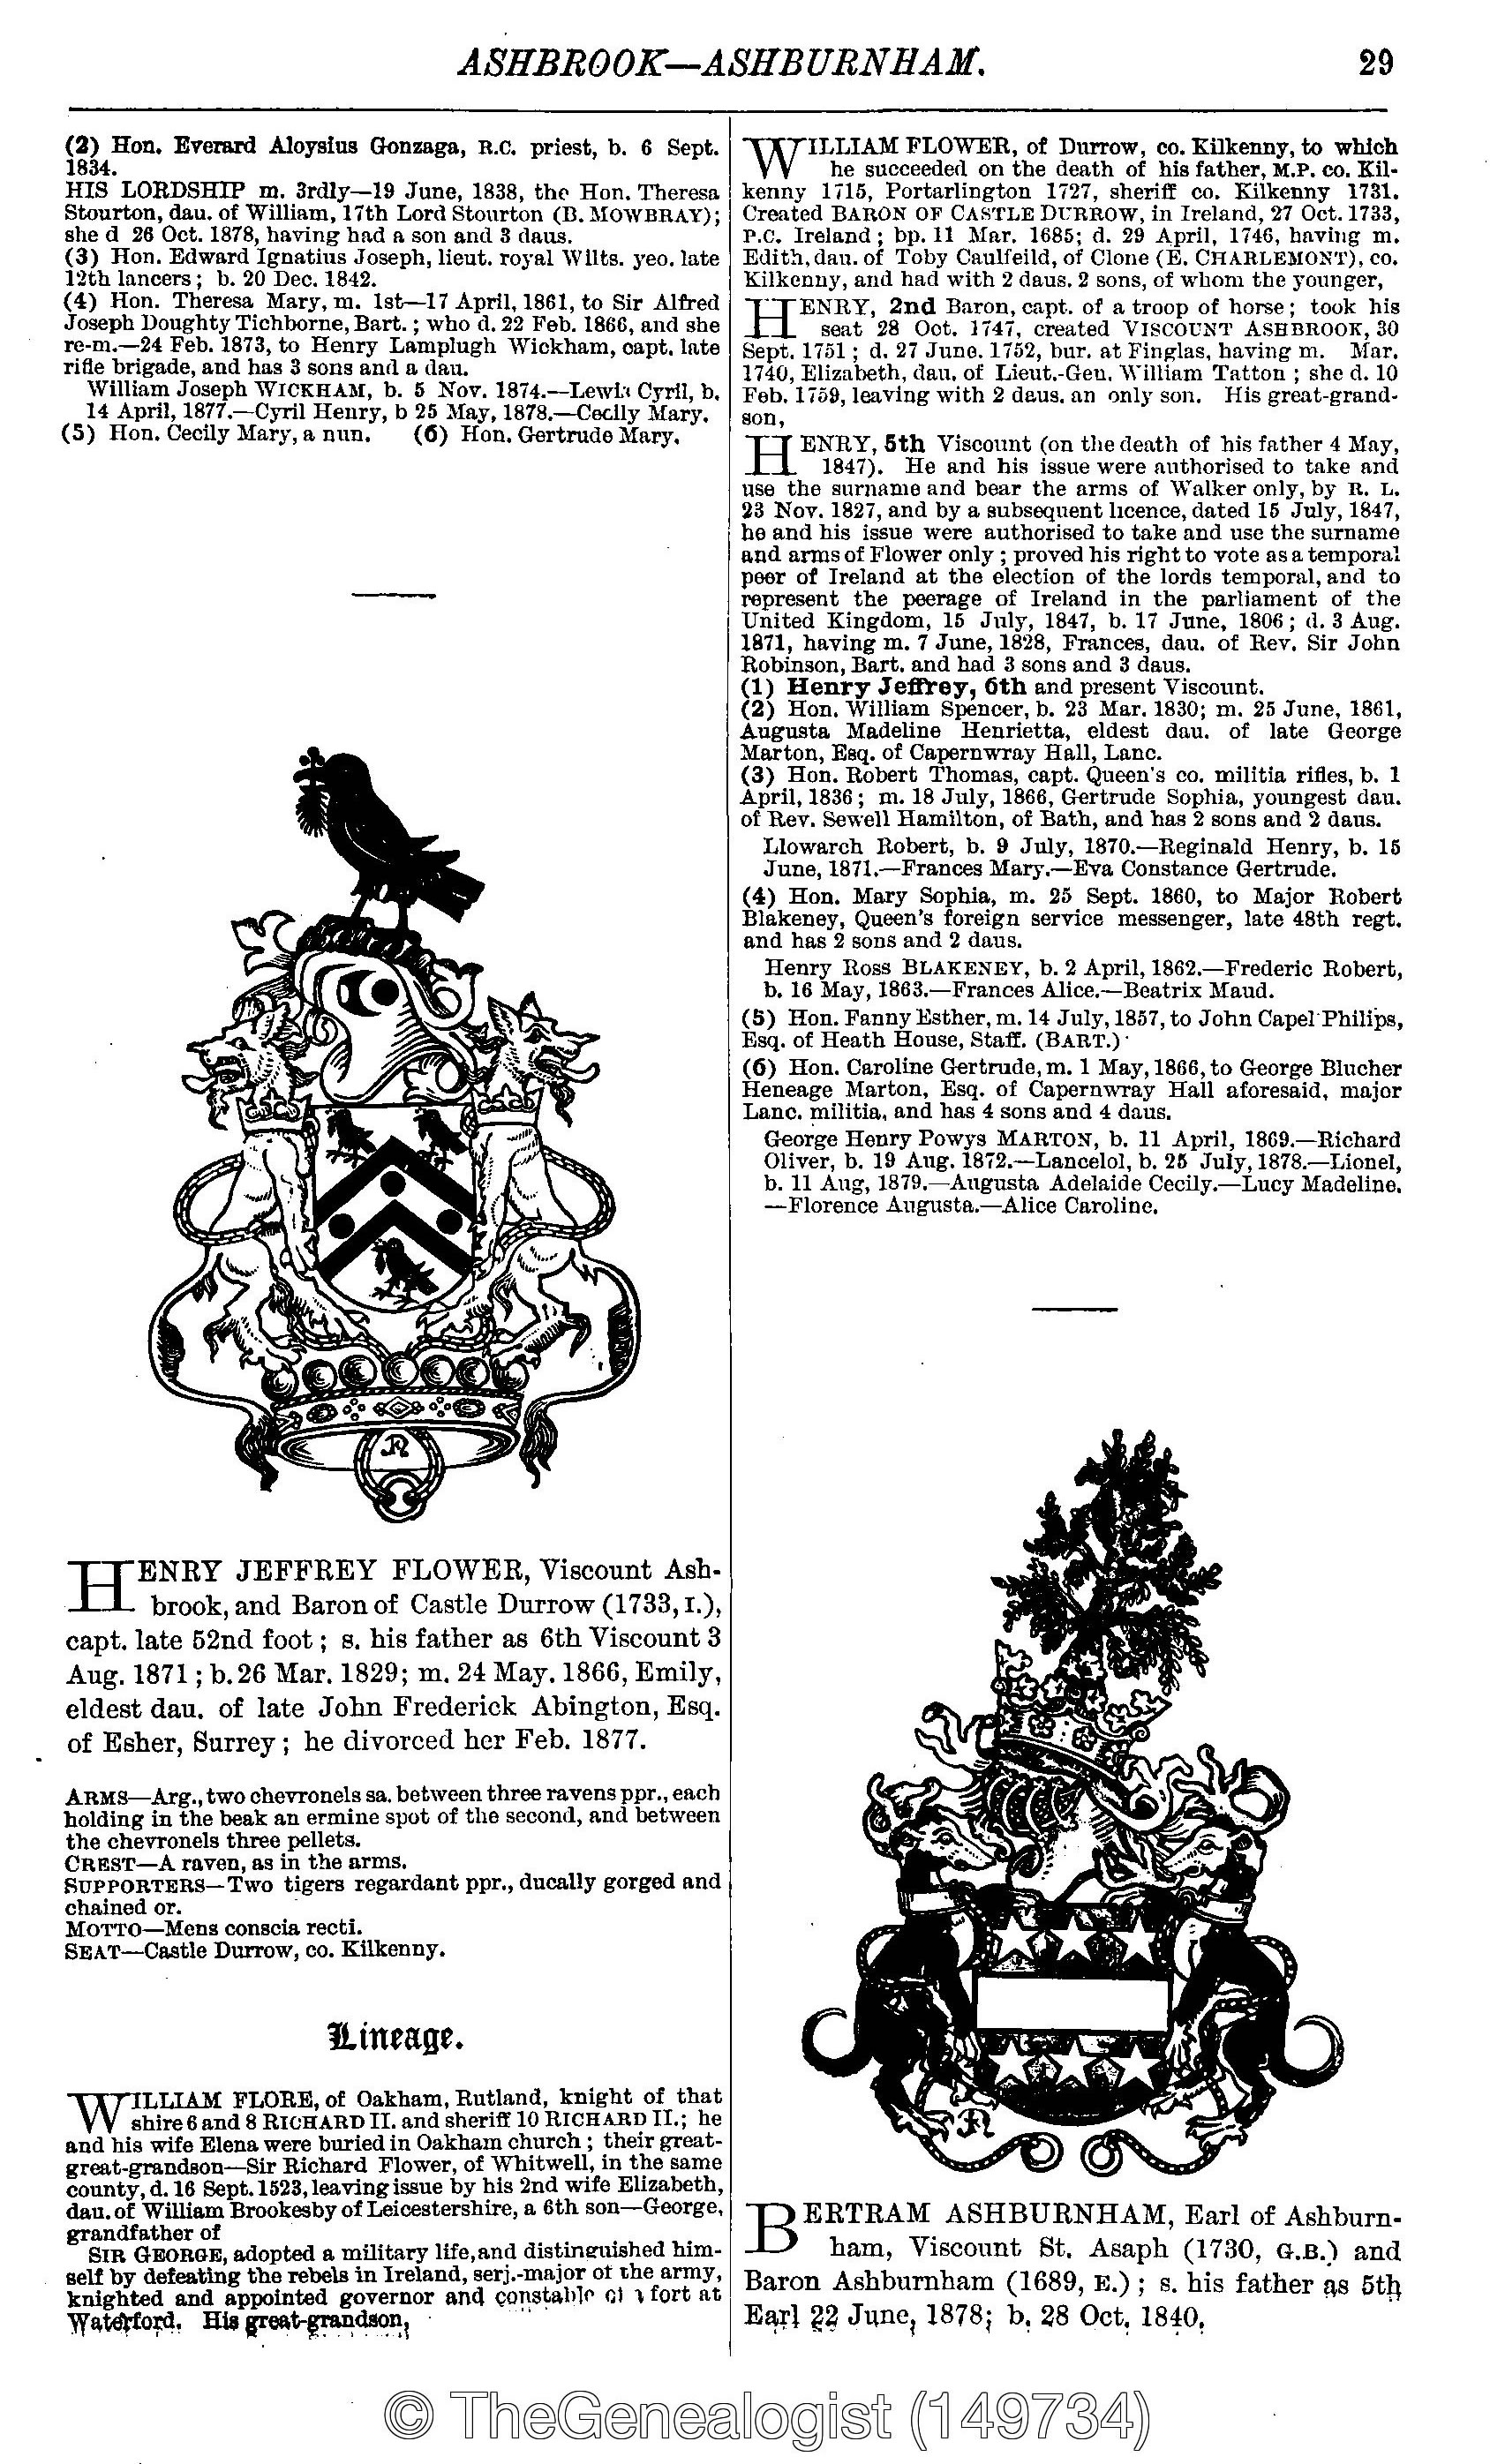 The Peerage, Baronetage and Knightage of the British Empire, 1880 from TheGenealogist's Peerage, Gentry &
		Royalty Records